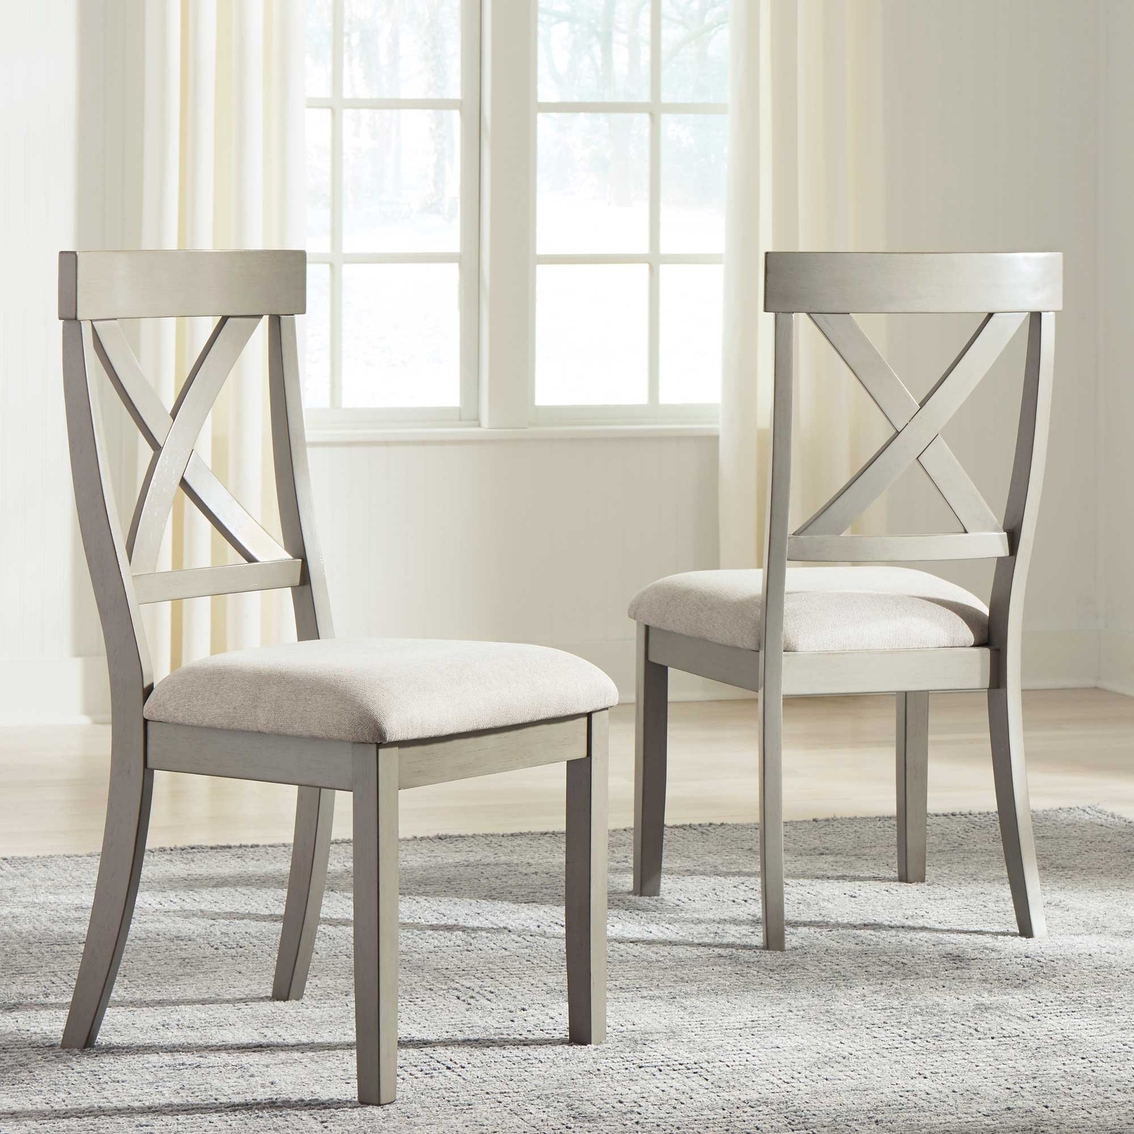 Signature Design by Ashley Parellen 6 pc. Dining Set: Table, 4 Chairs, Bench - Image 4 of 8